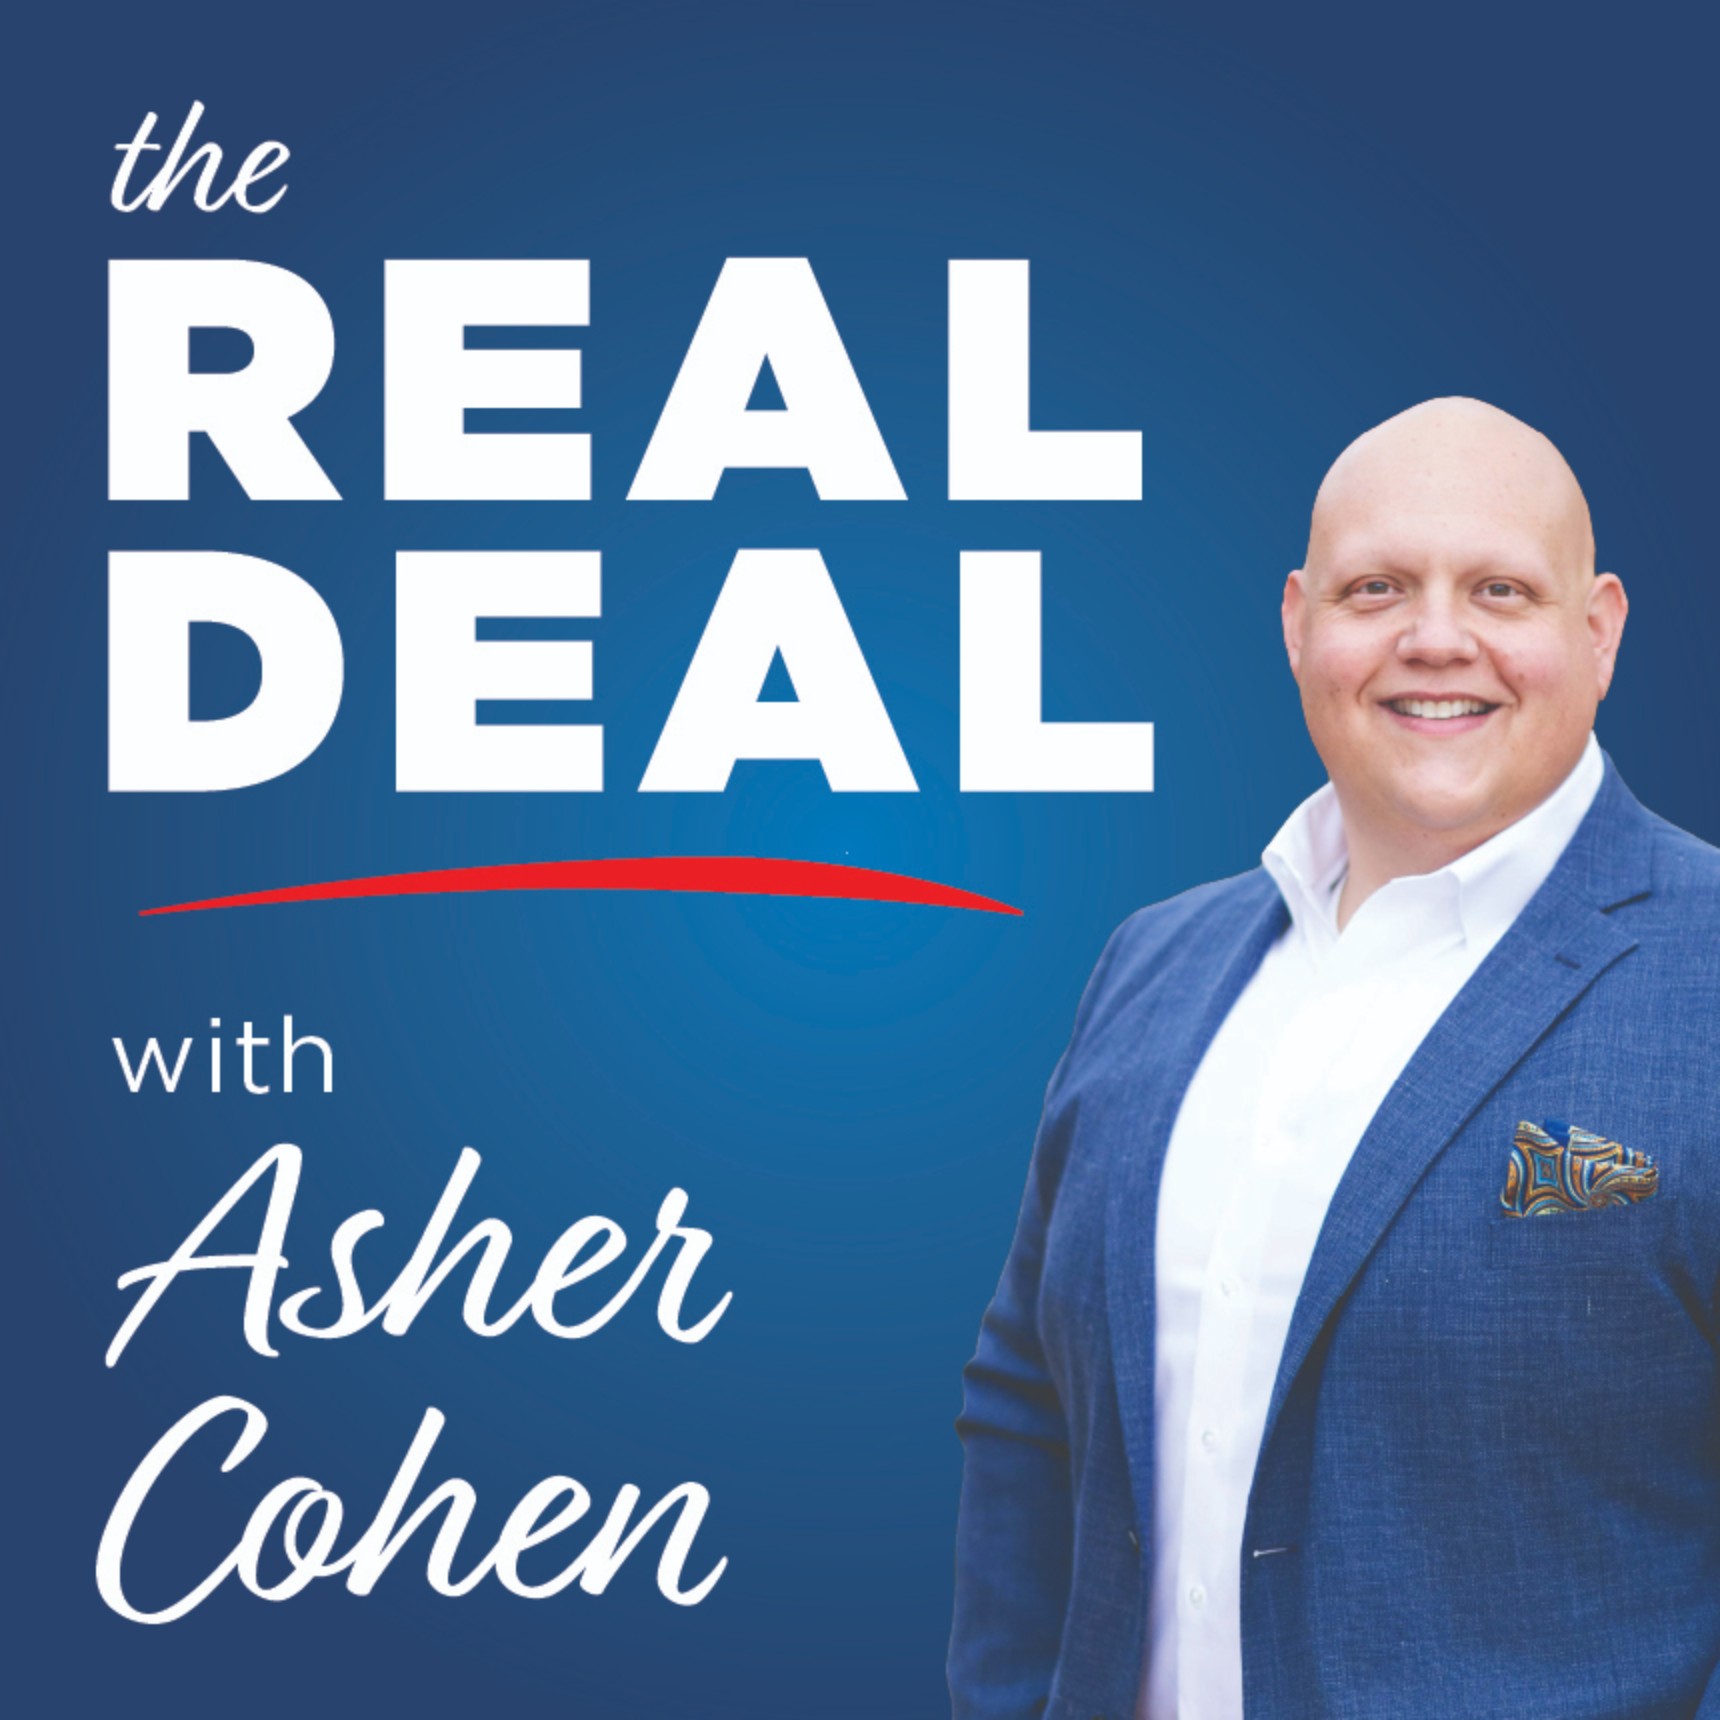 The Real Deal with Asher Cohen